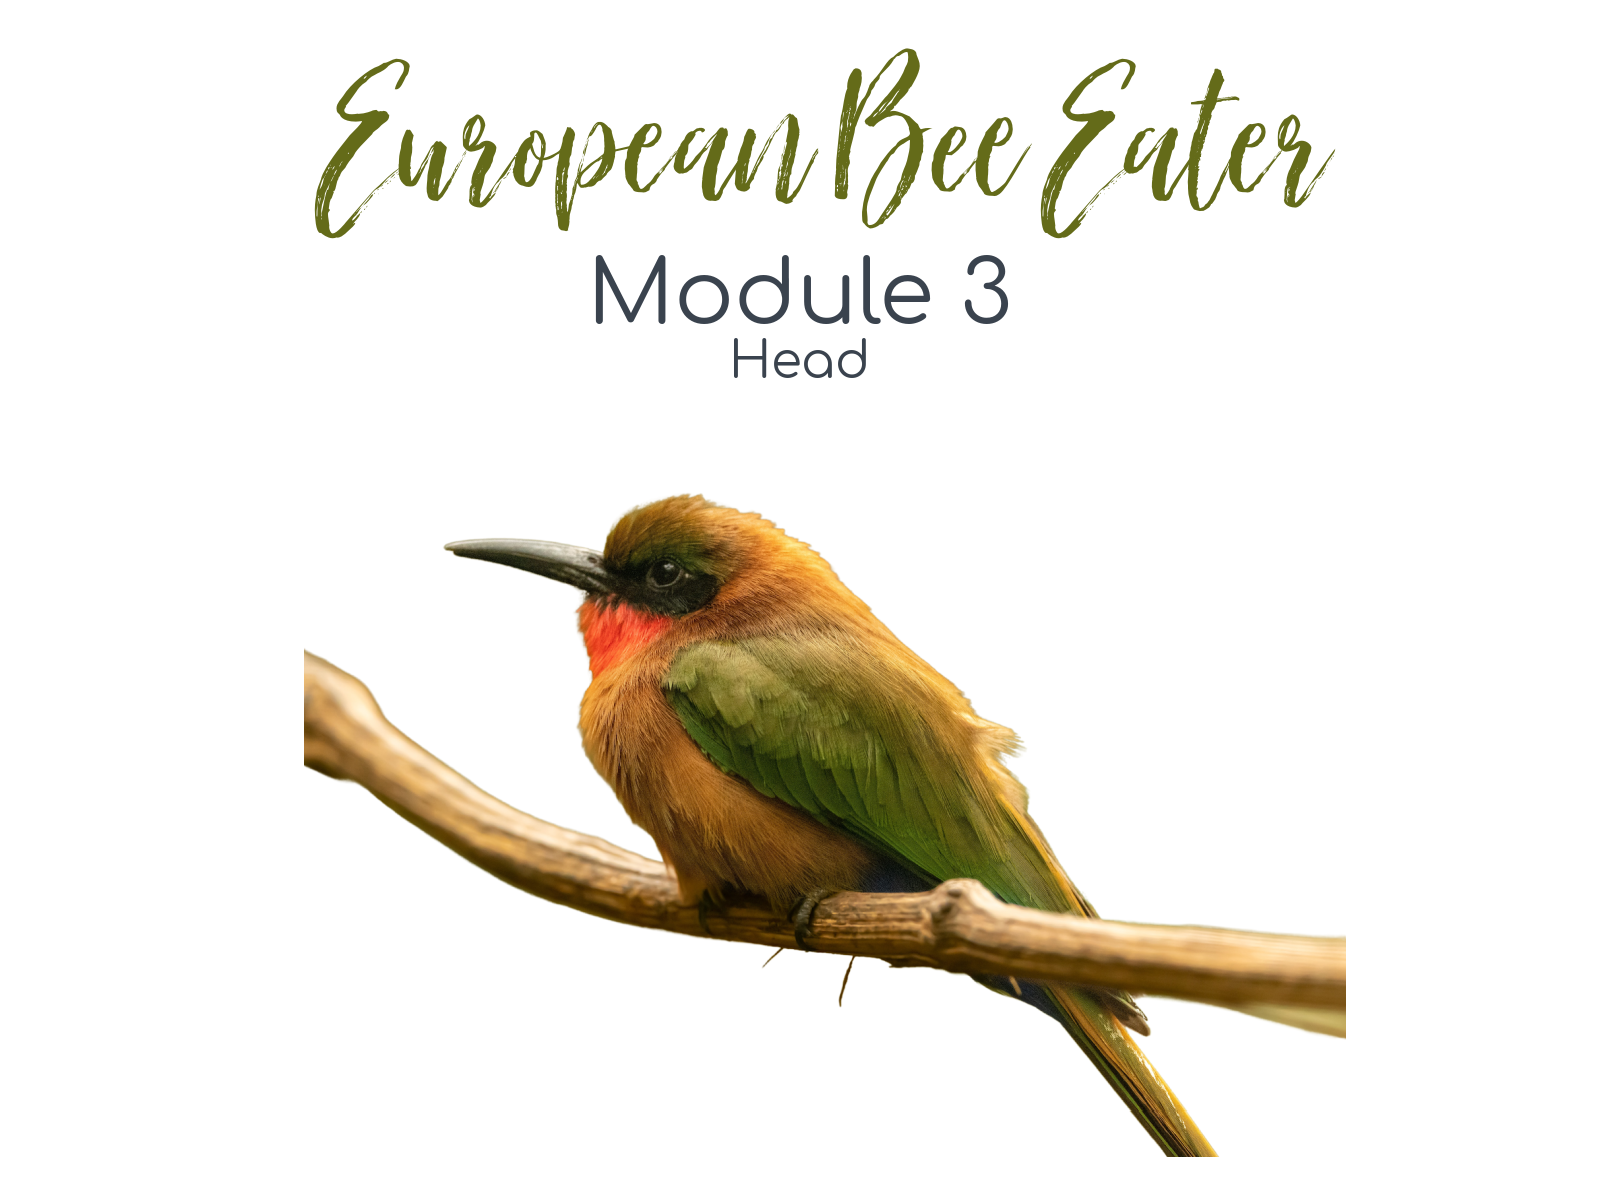 Link to Colored Pencil Drawing Tutorial of an European Bee Eater